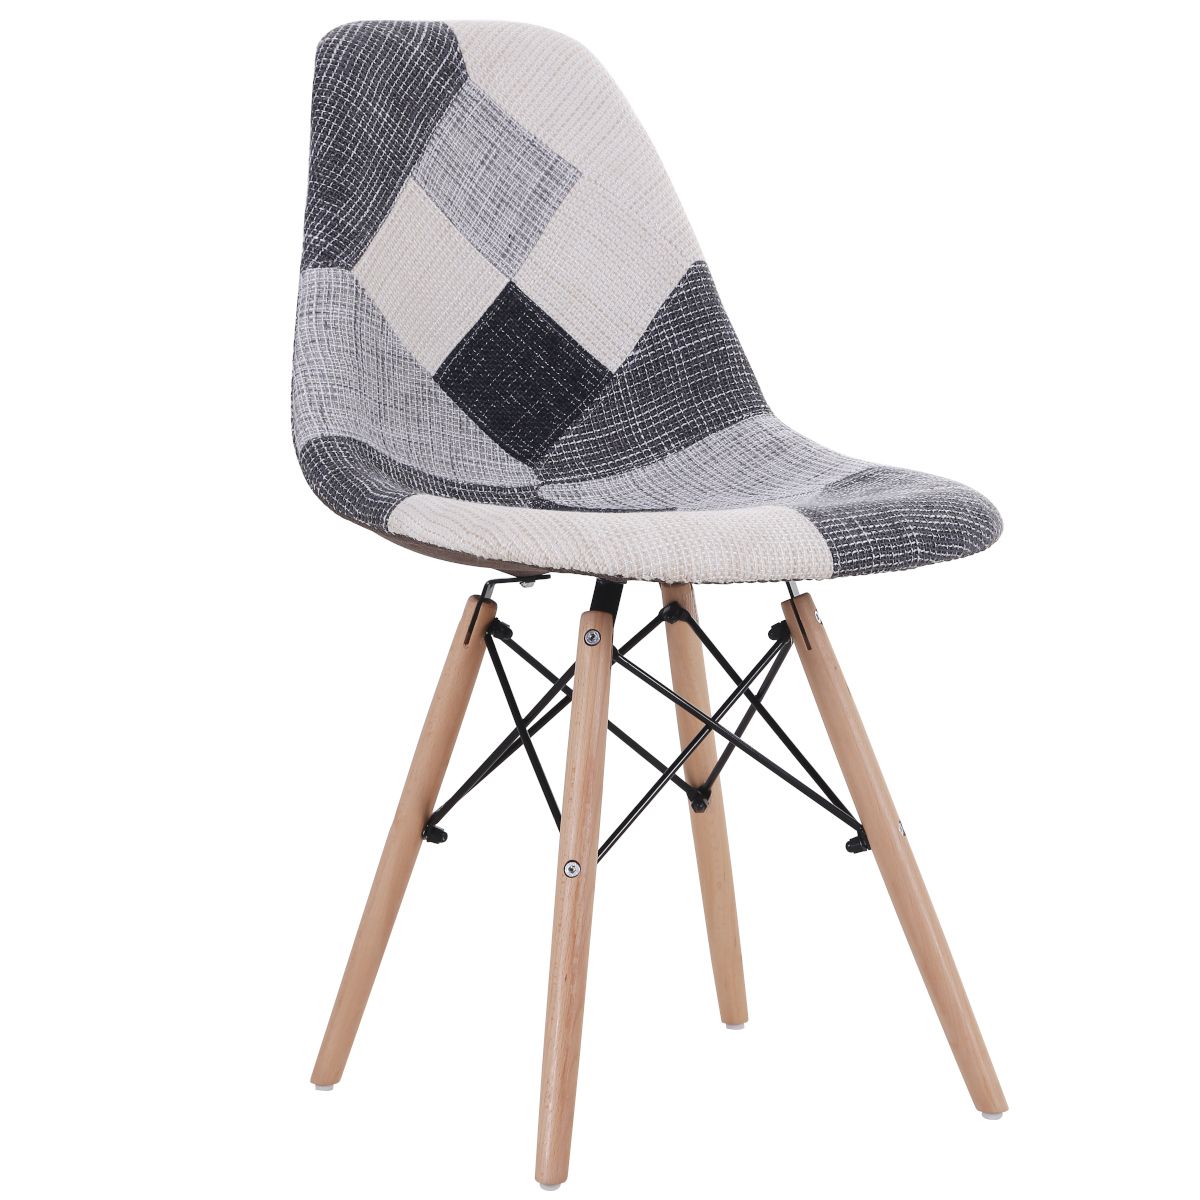 Chair CORYLOUS Patchwork Fabric / Wood 51x46x82cm